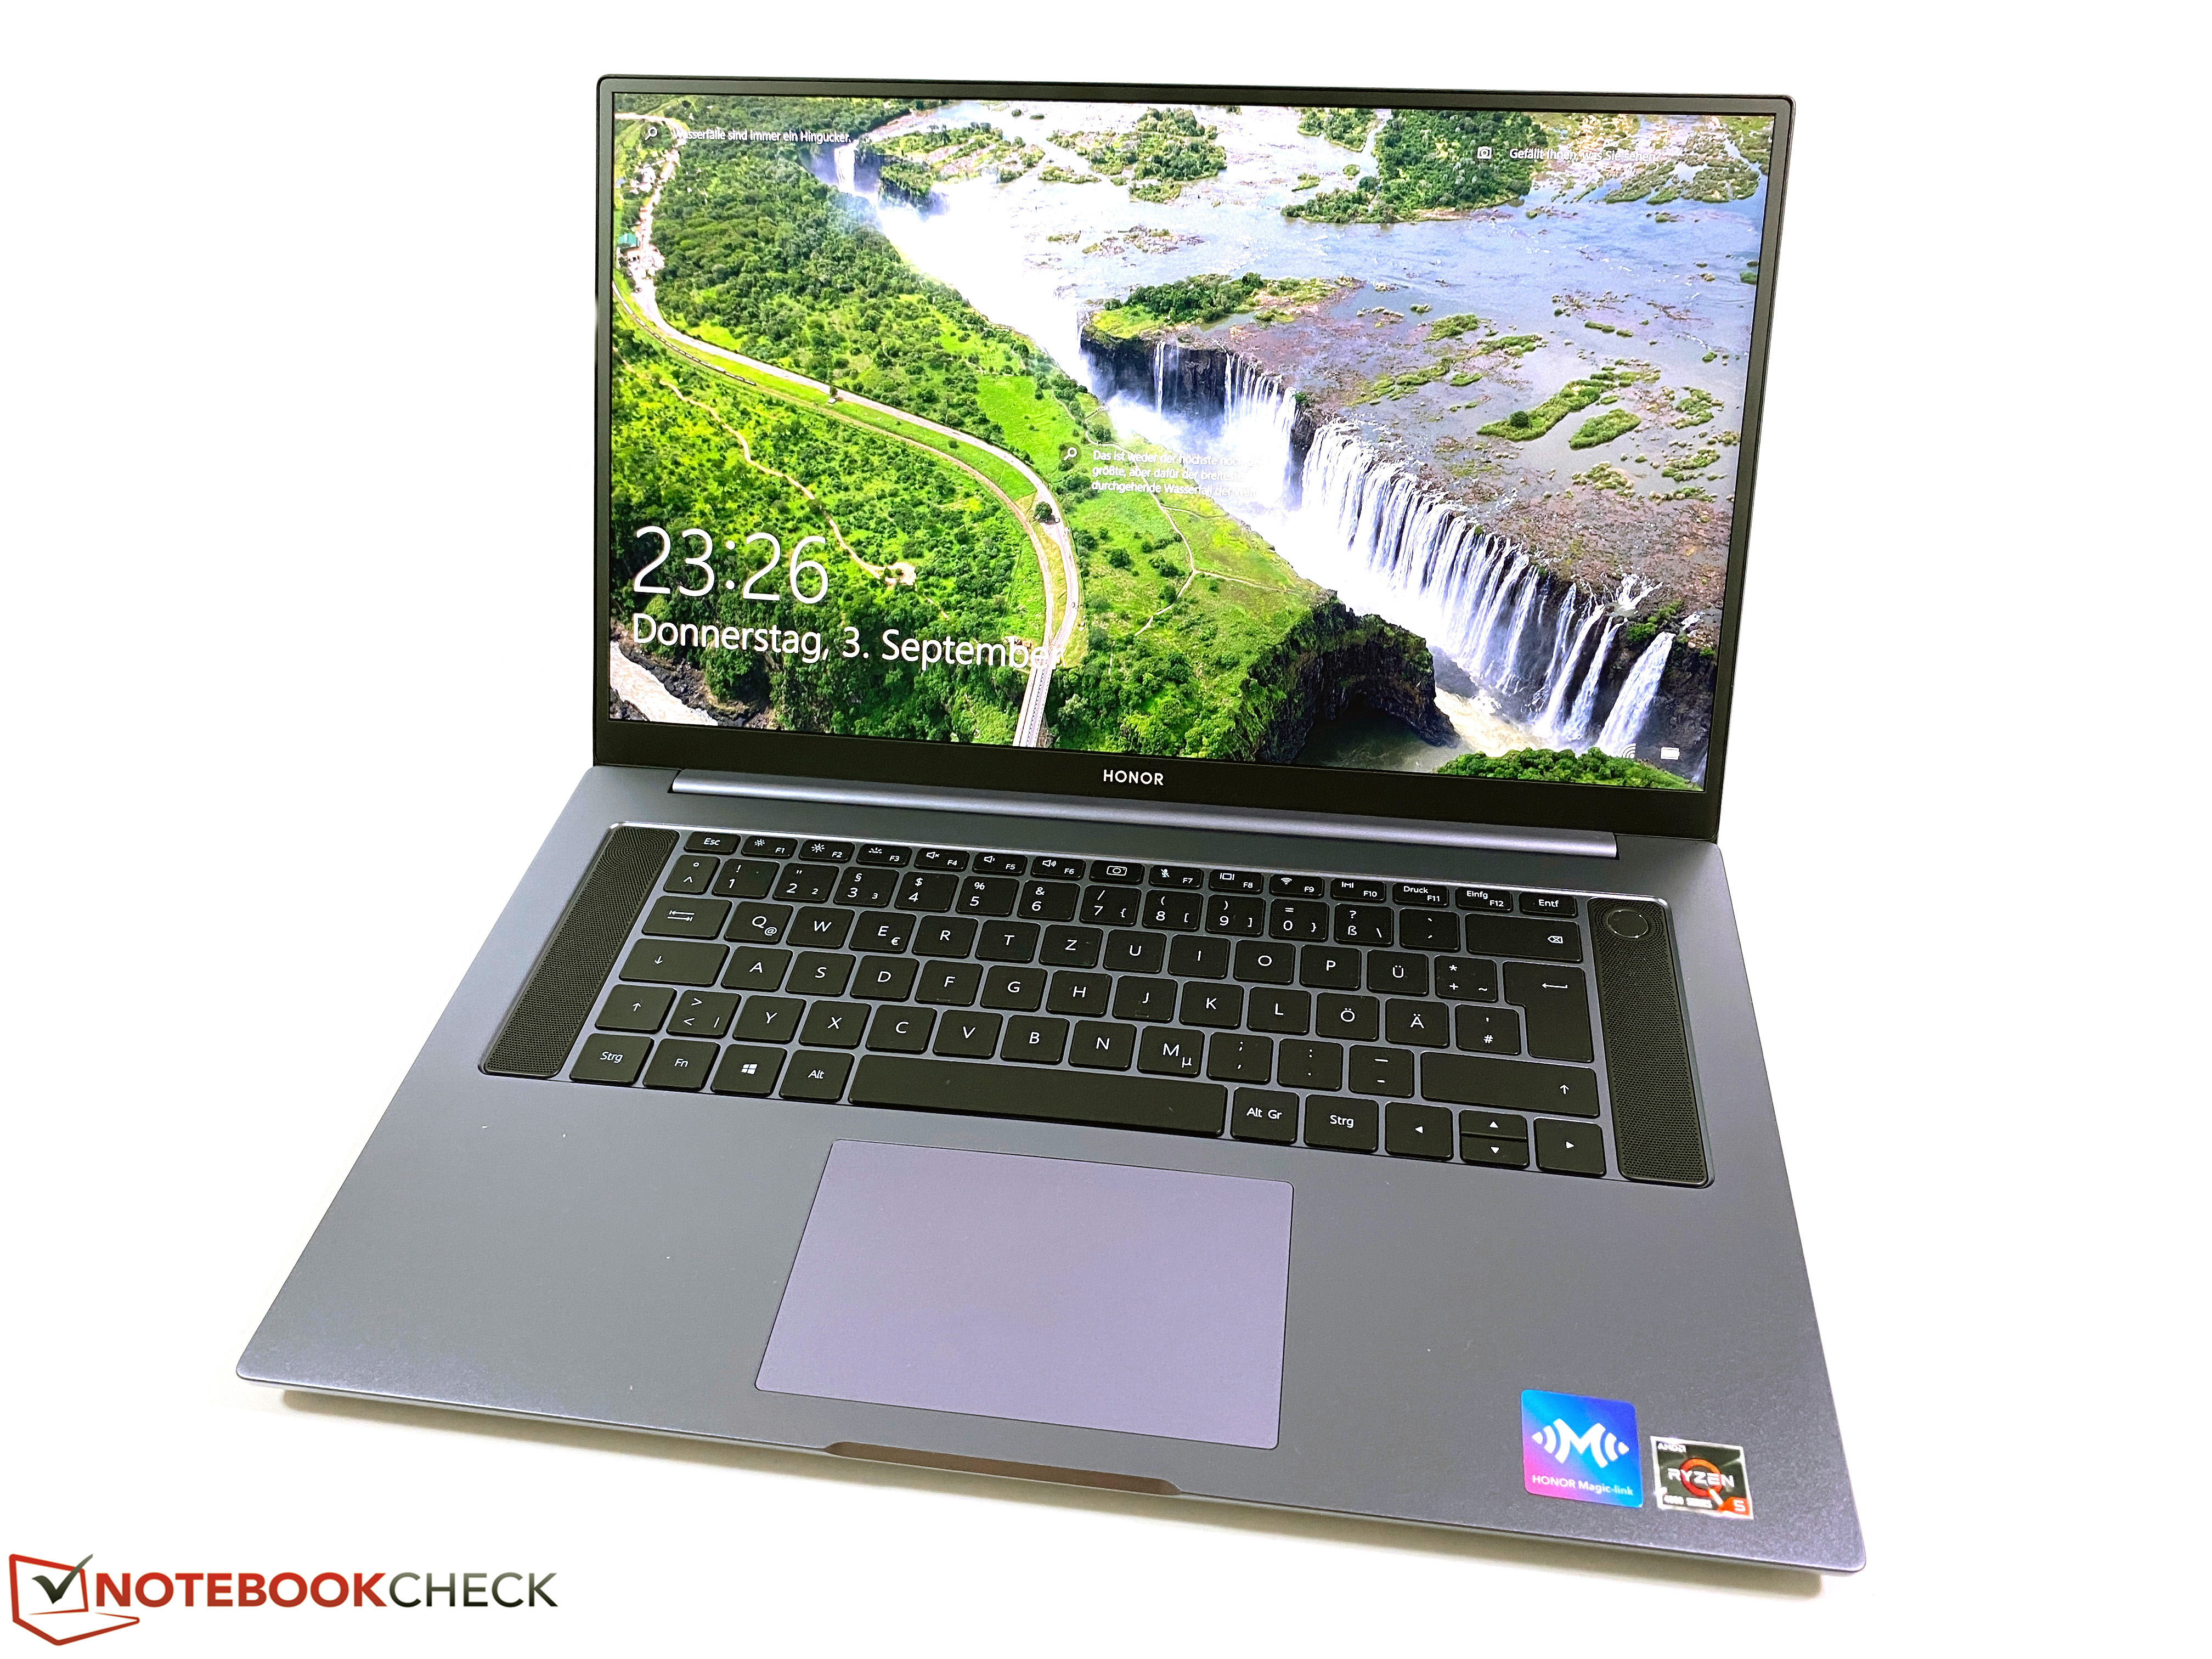 Honor magicbook pro review: A Windows laptop with an Apple MacBook style